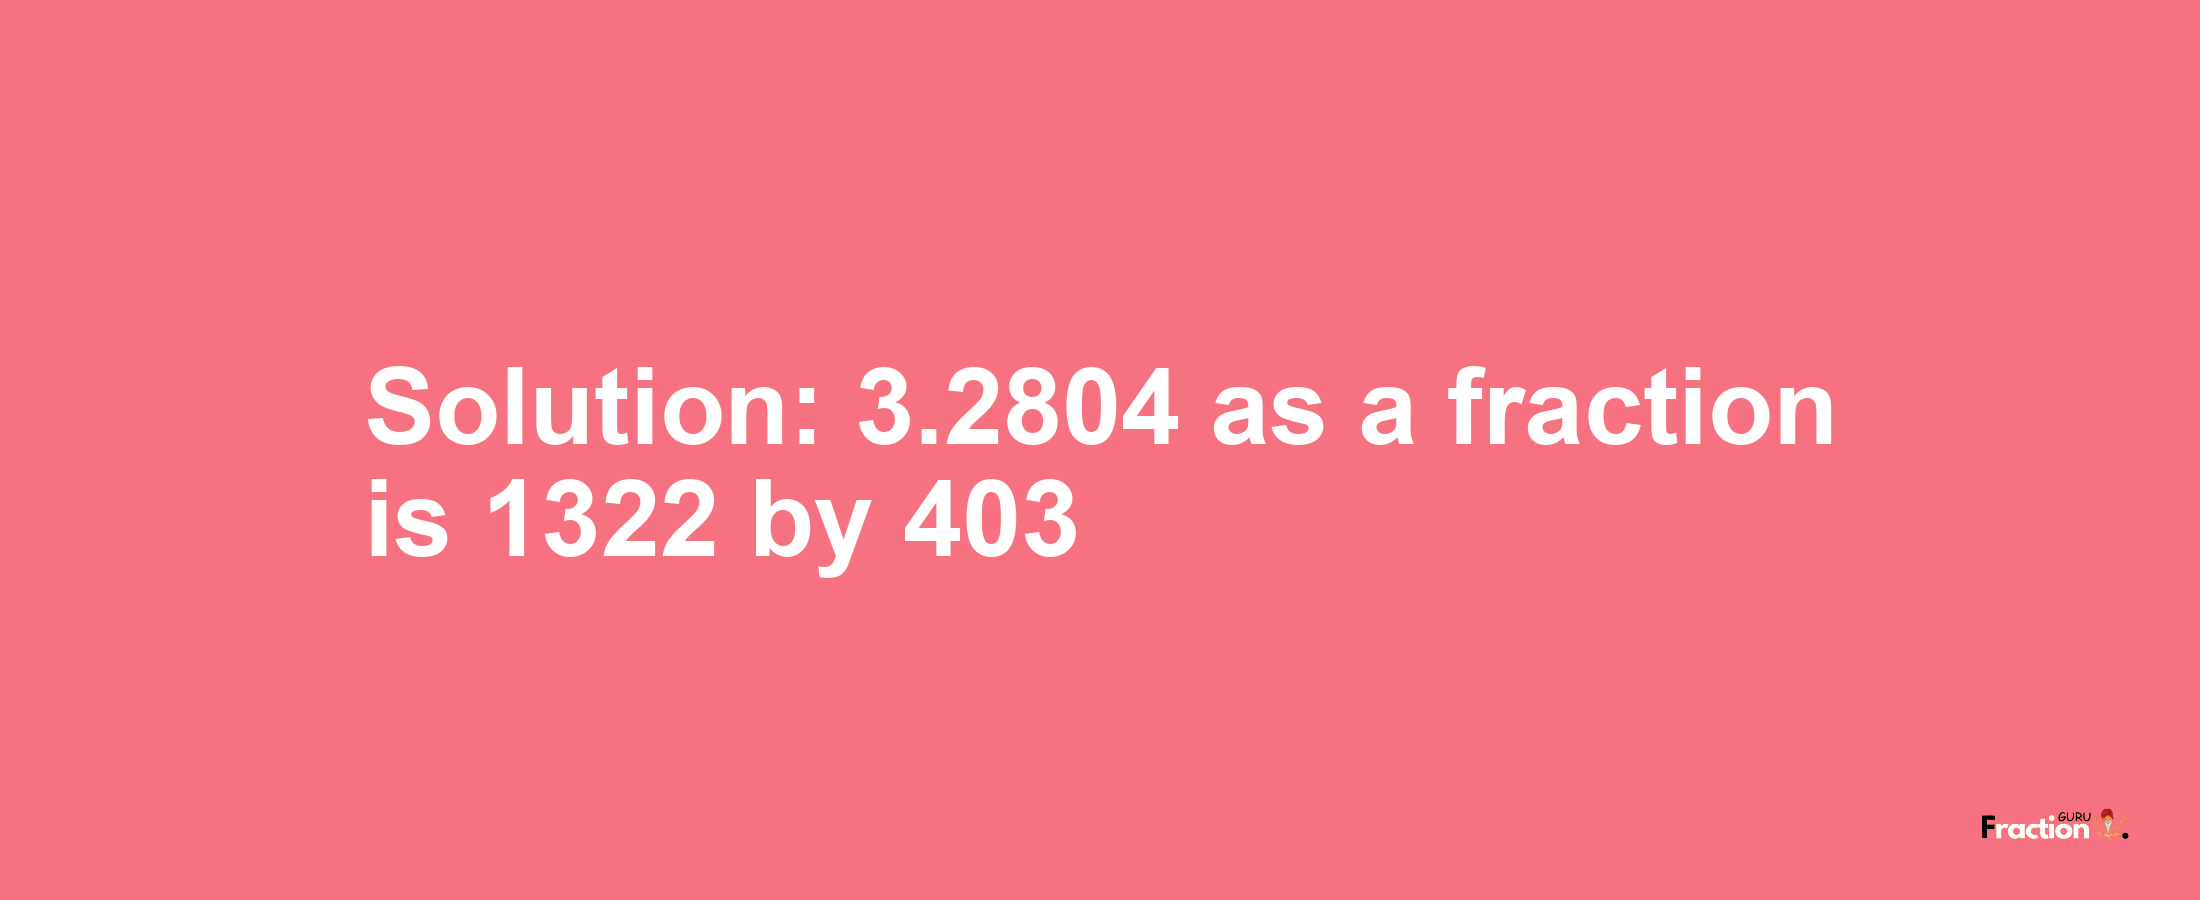 Solution:3.2804 as a fraction is 1322/403